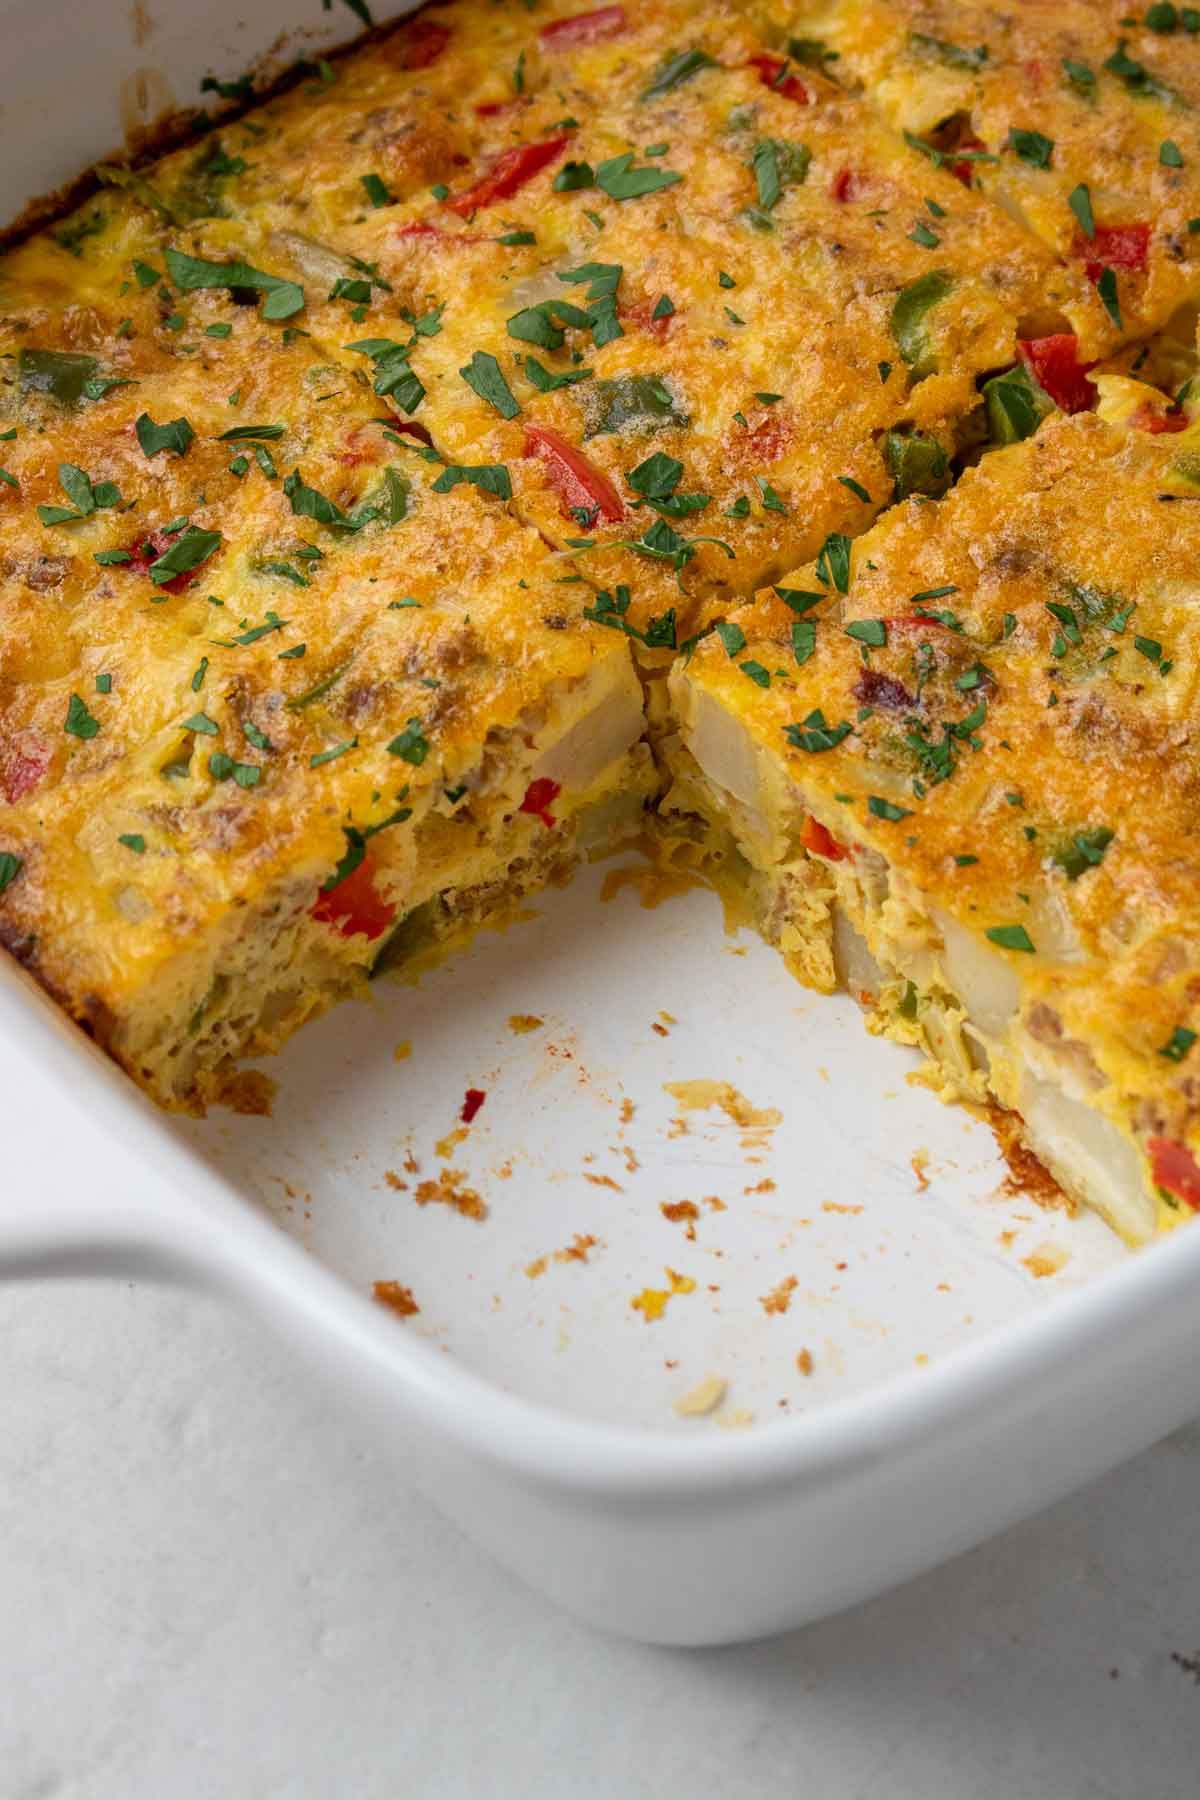 Cooked breakfast casserole with a slice missing